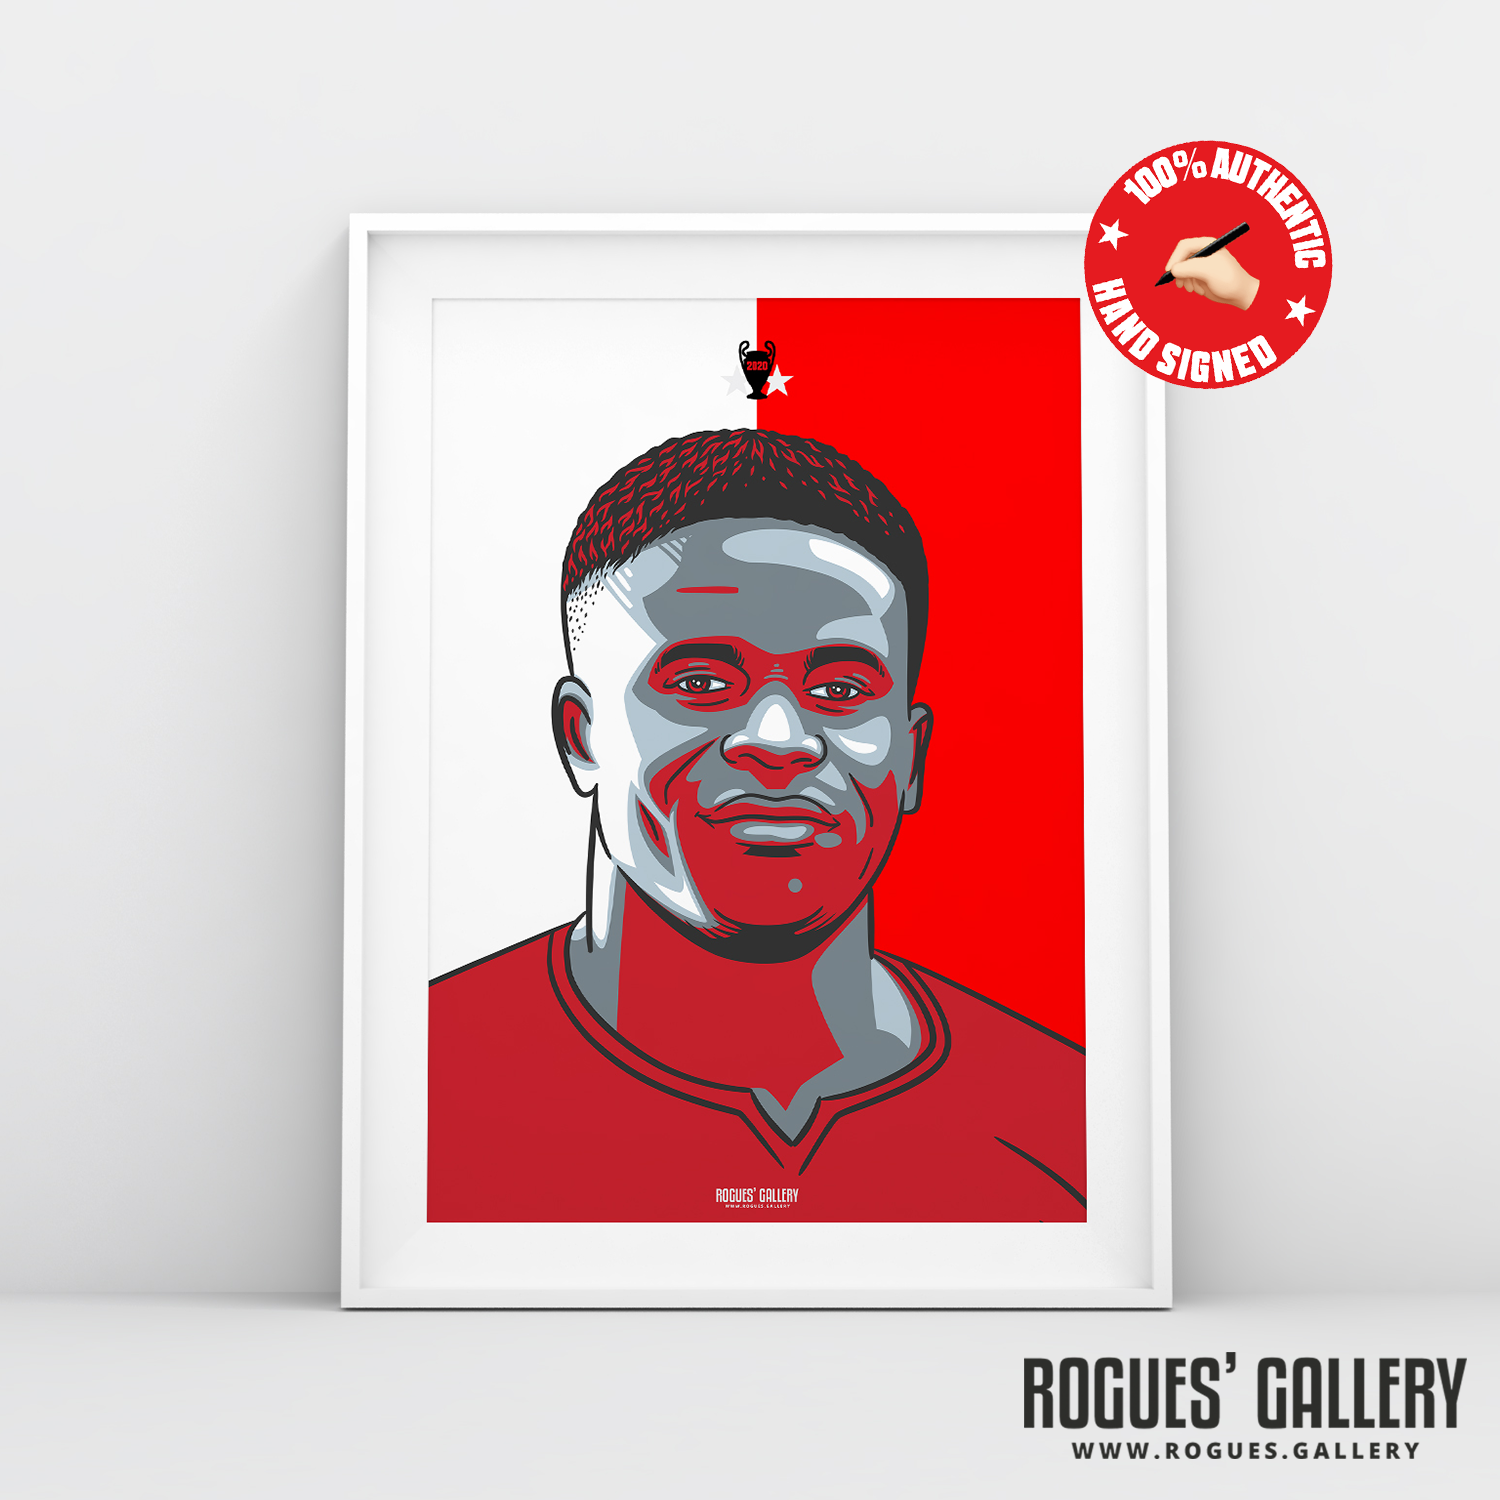 Brice Samba Nottingham Forest French goalkeeper #GetBehindTheLads Rogues' Gallery A3 red & White